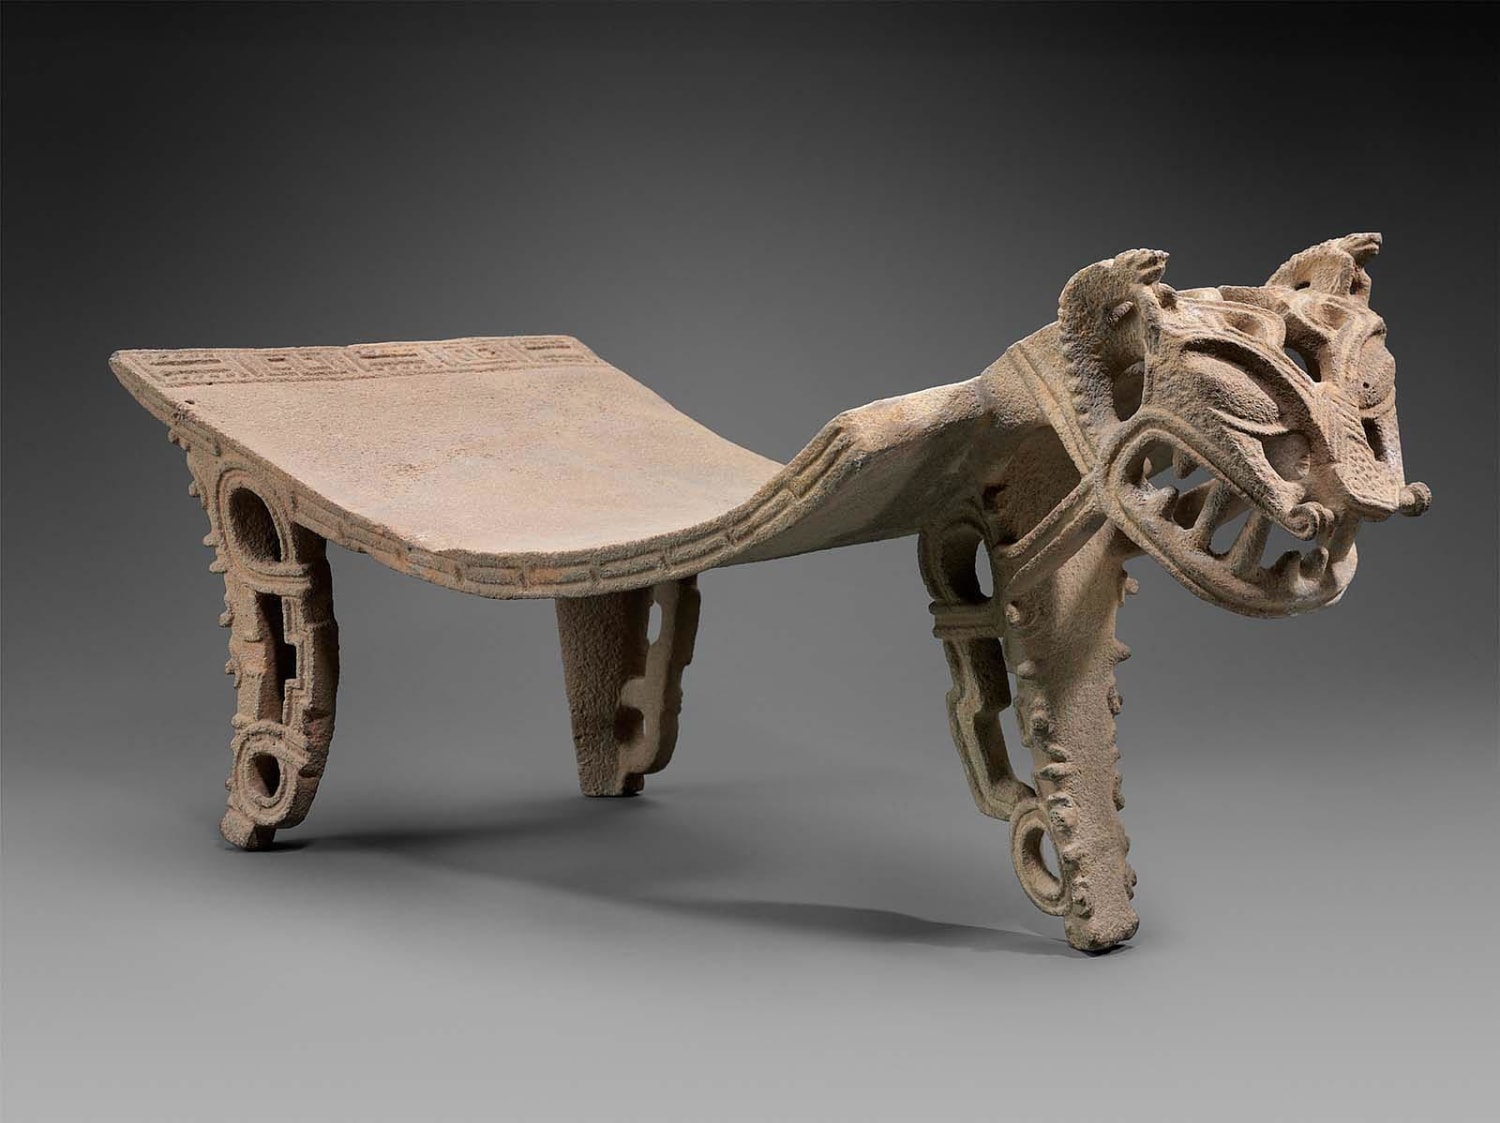 Jaguar effigy metate (ceremonial seat) from Central America, 300–700 CE